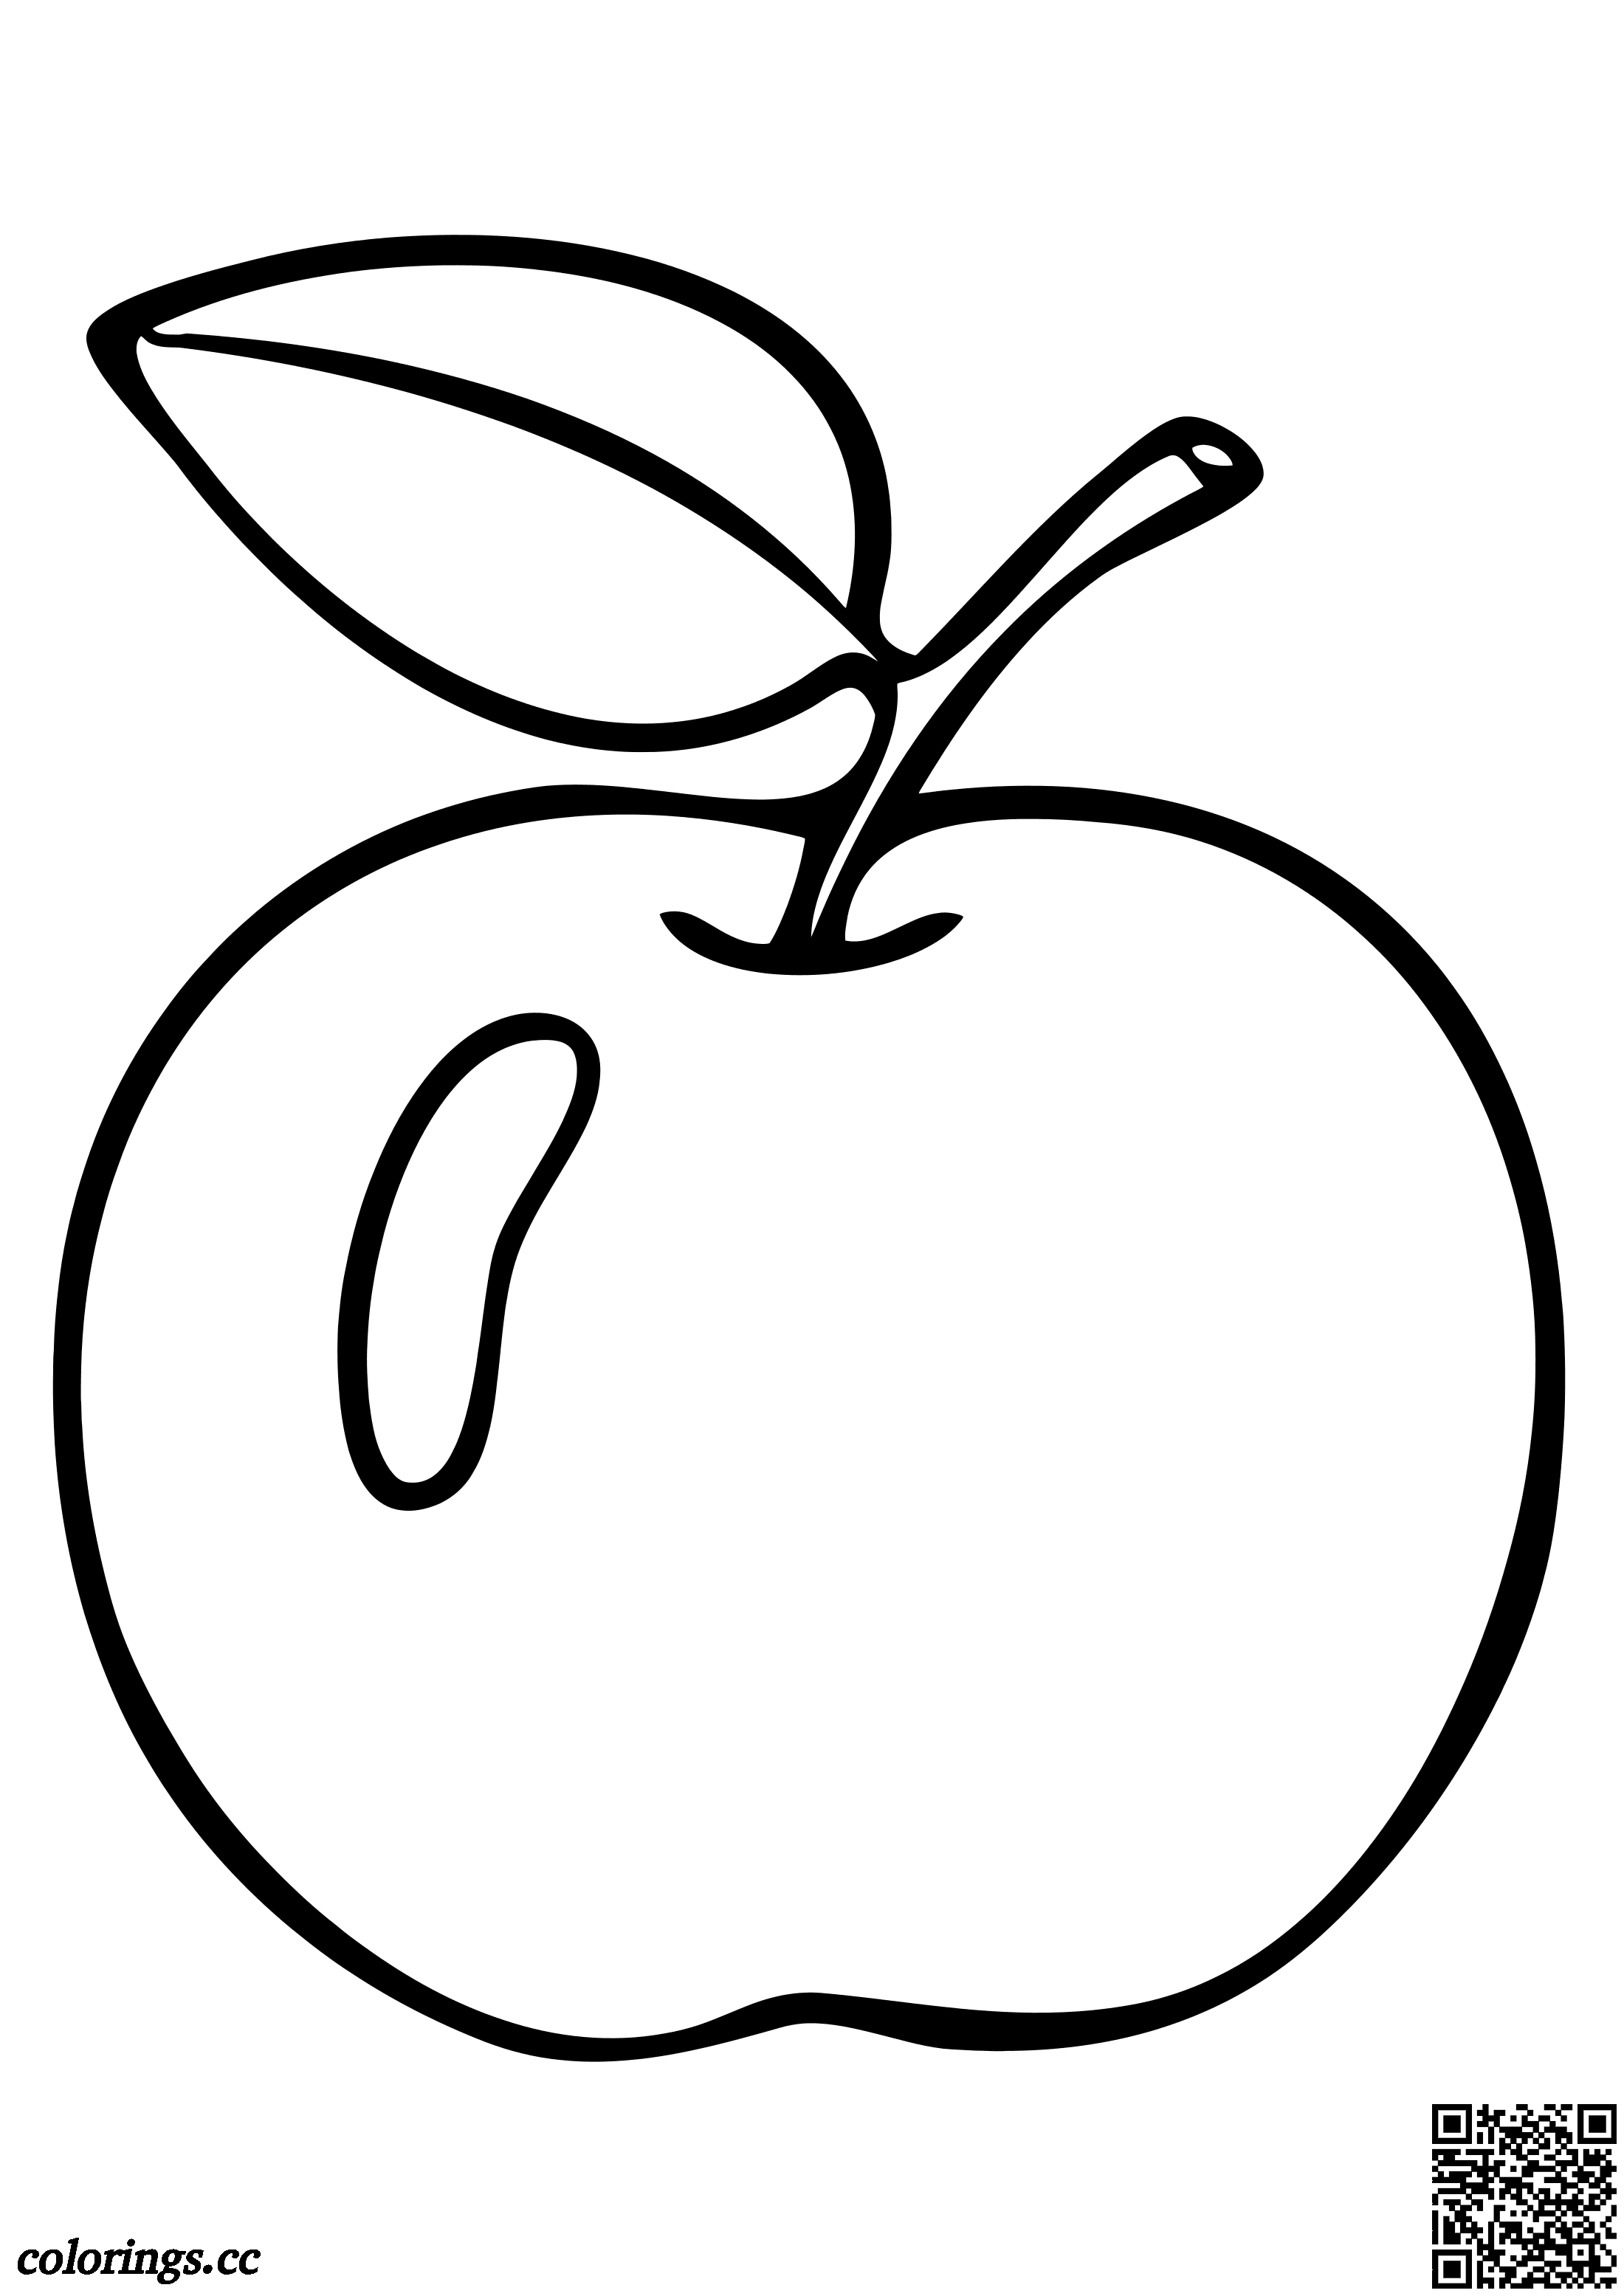 Apple coloring pages, Toddlers coloring pages   Colorings.cc